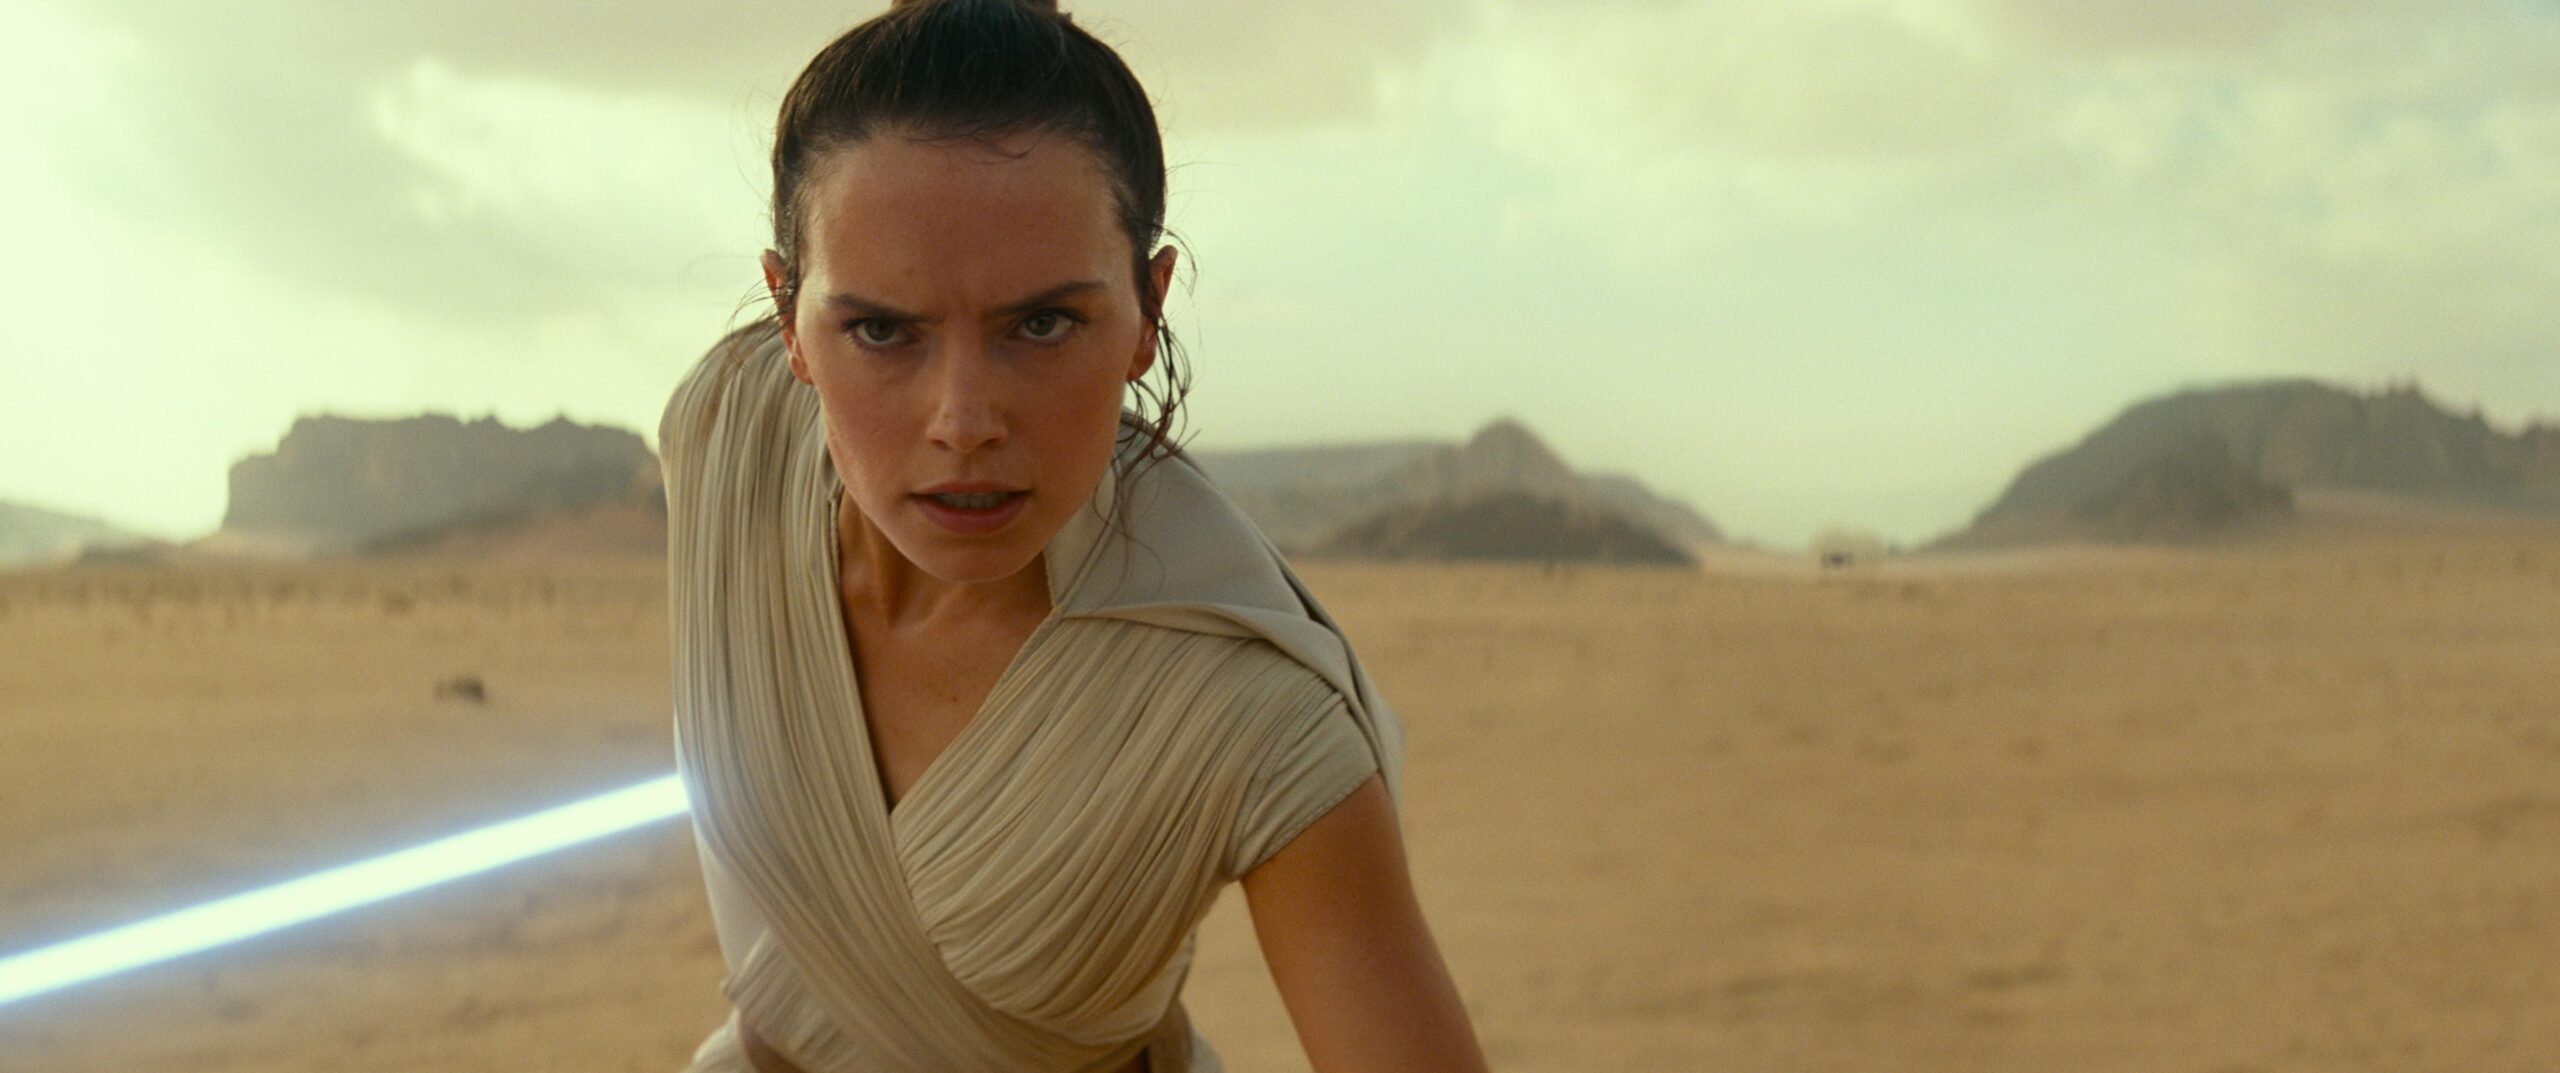 Star Wars The Rise of Skywalker trailer what you might’ve missed